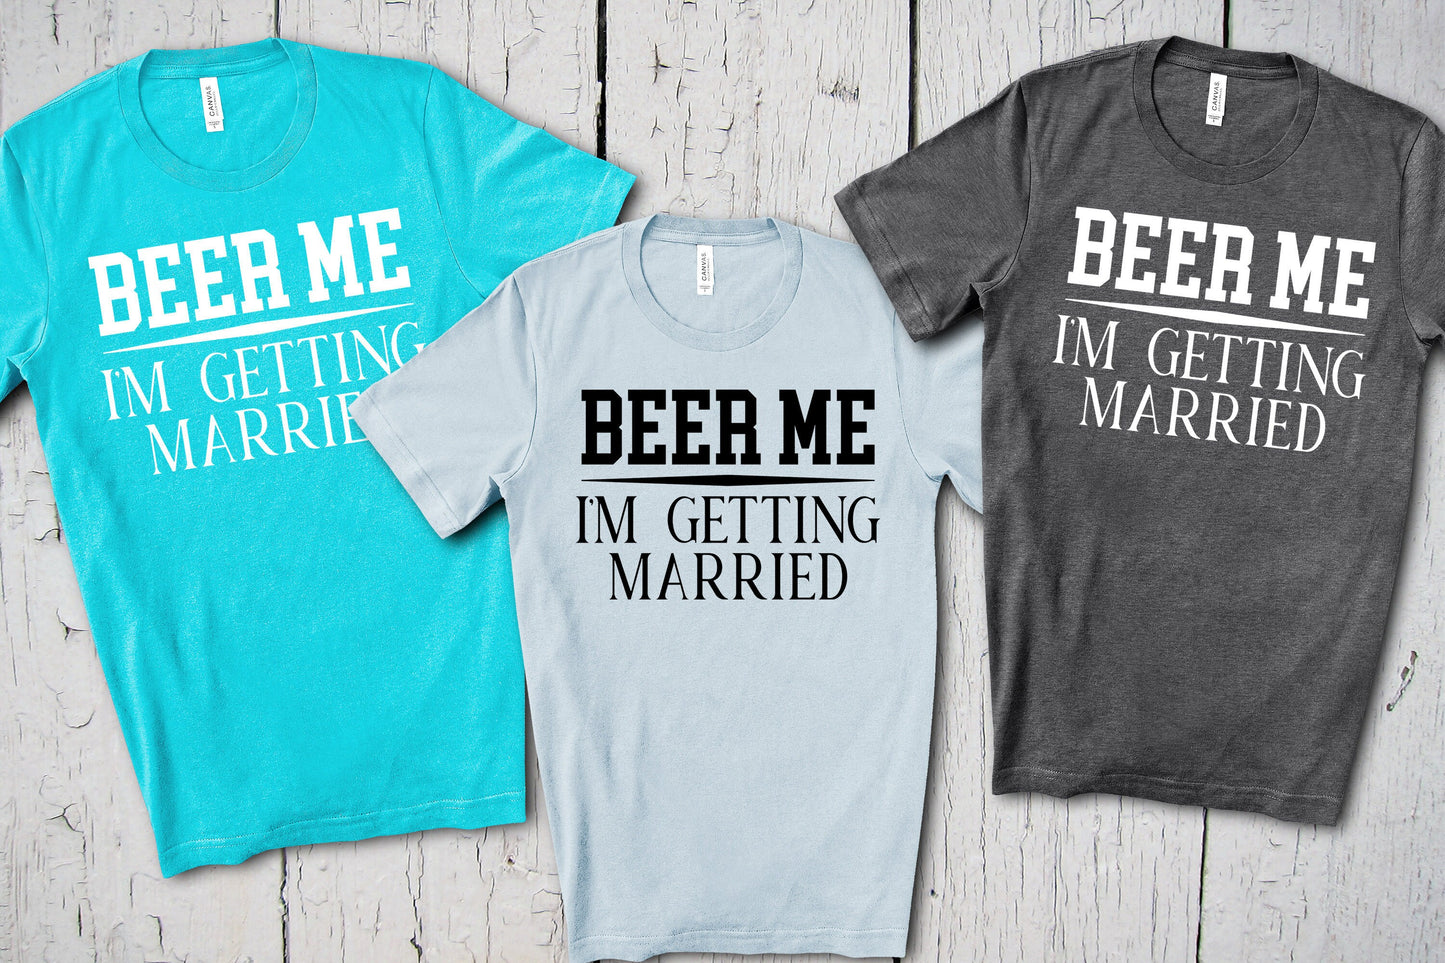 Beer Me, I'm Getting Married, Groom Shirt, Beer T Shirt, Bachelor Party Shirt, Gift for Groom, Wedding Party Shirt, Bridal Party, Stag Party